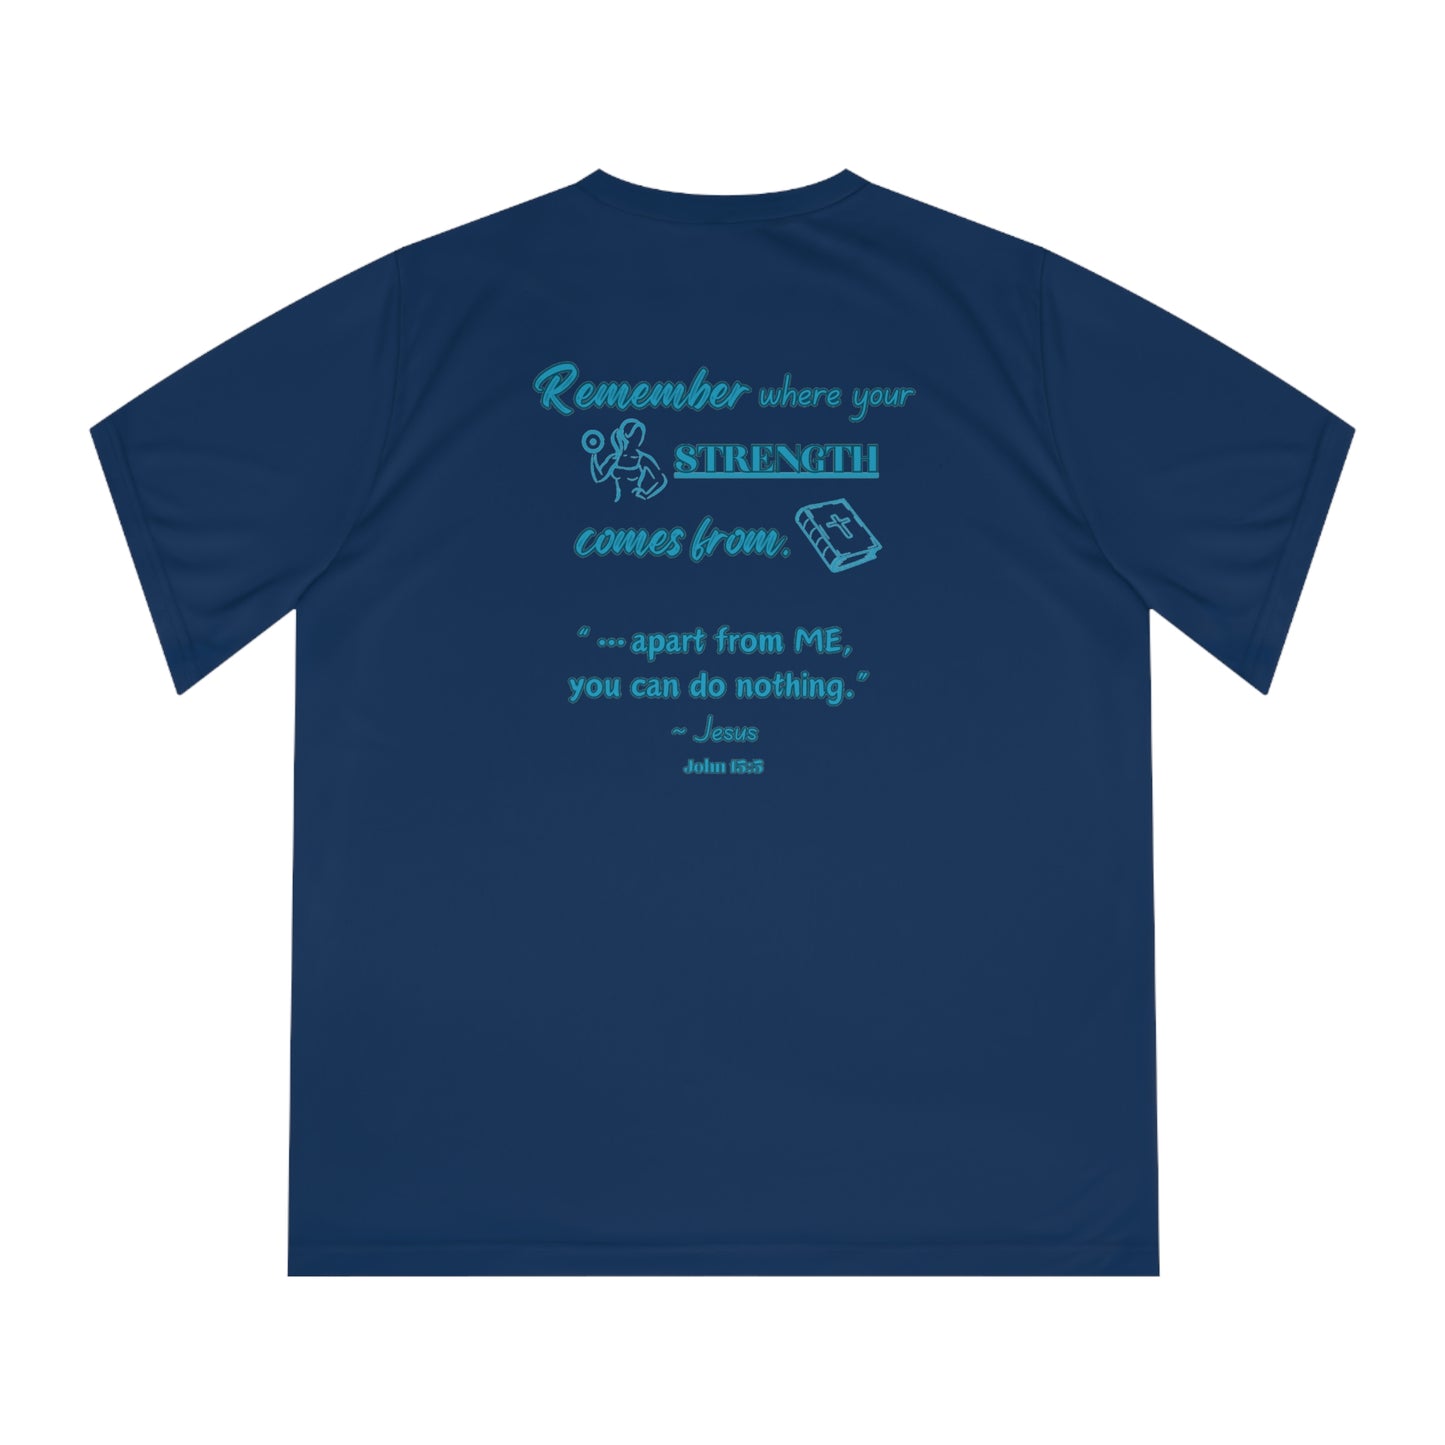 Women's Performance V-Neck T-Shirt - Remember Where Your Strength Comes From